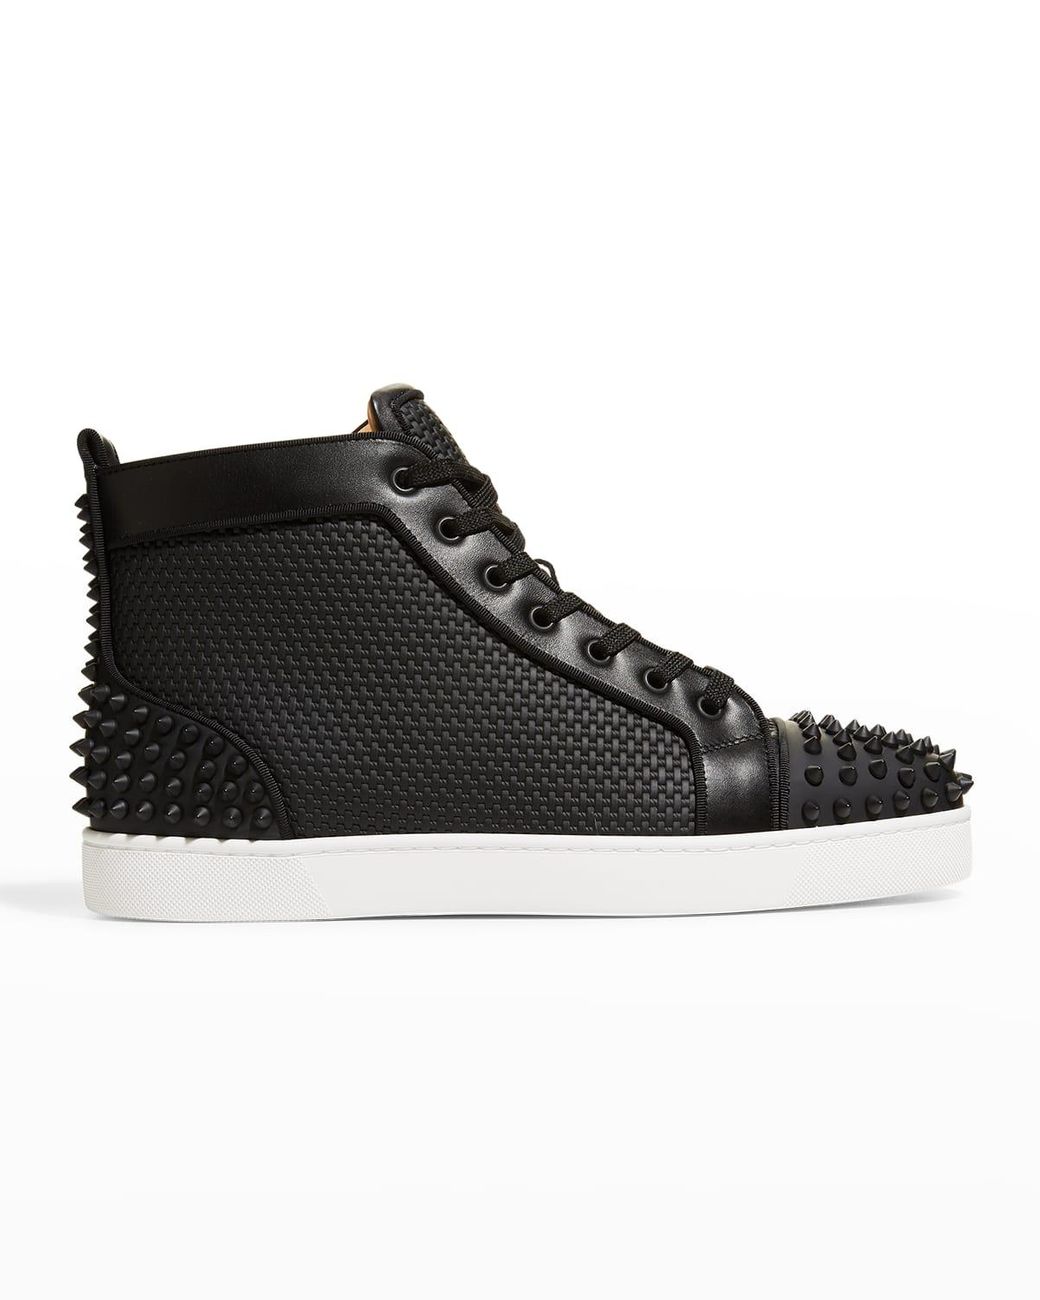 Lou Spikes - High-top sneakers - Calf leather - Black - Christian